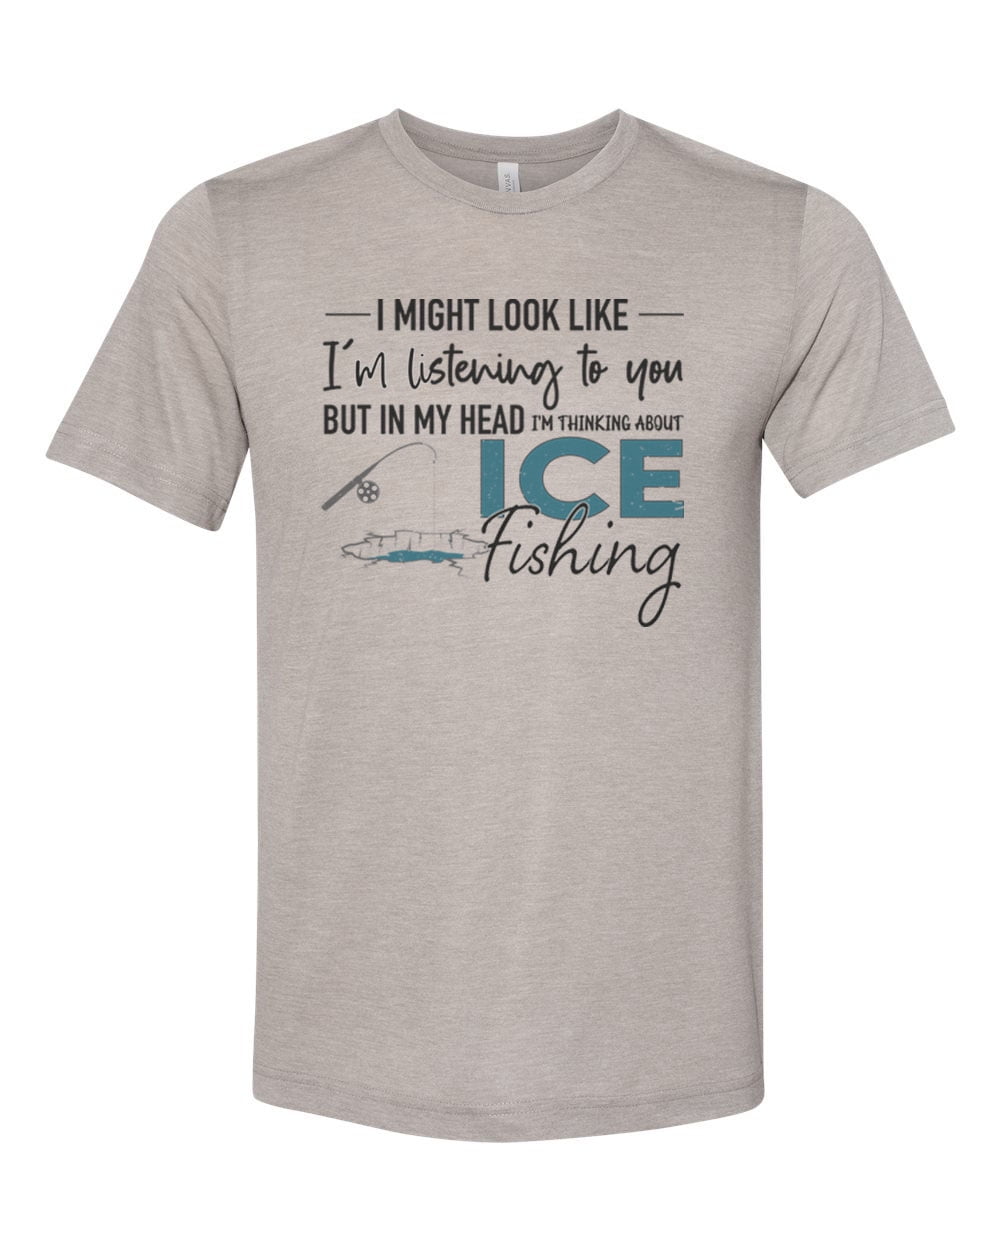 Ice Fishing Shirt, Thinking About Ice Fishing, Fishing Shirt, Unisex Fit,  Gift For Him, Father's Day Gift, Ice Fishing, Walleye Shirt, Pike, Peach